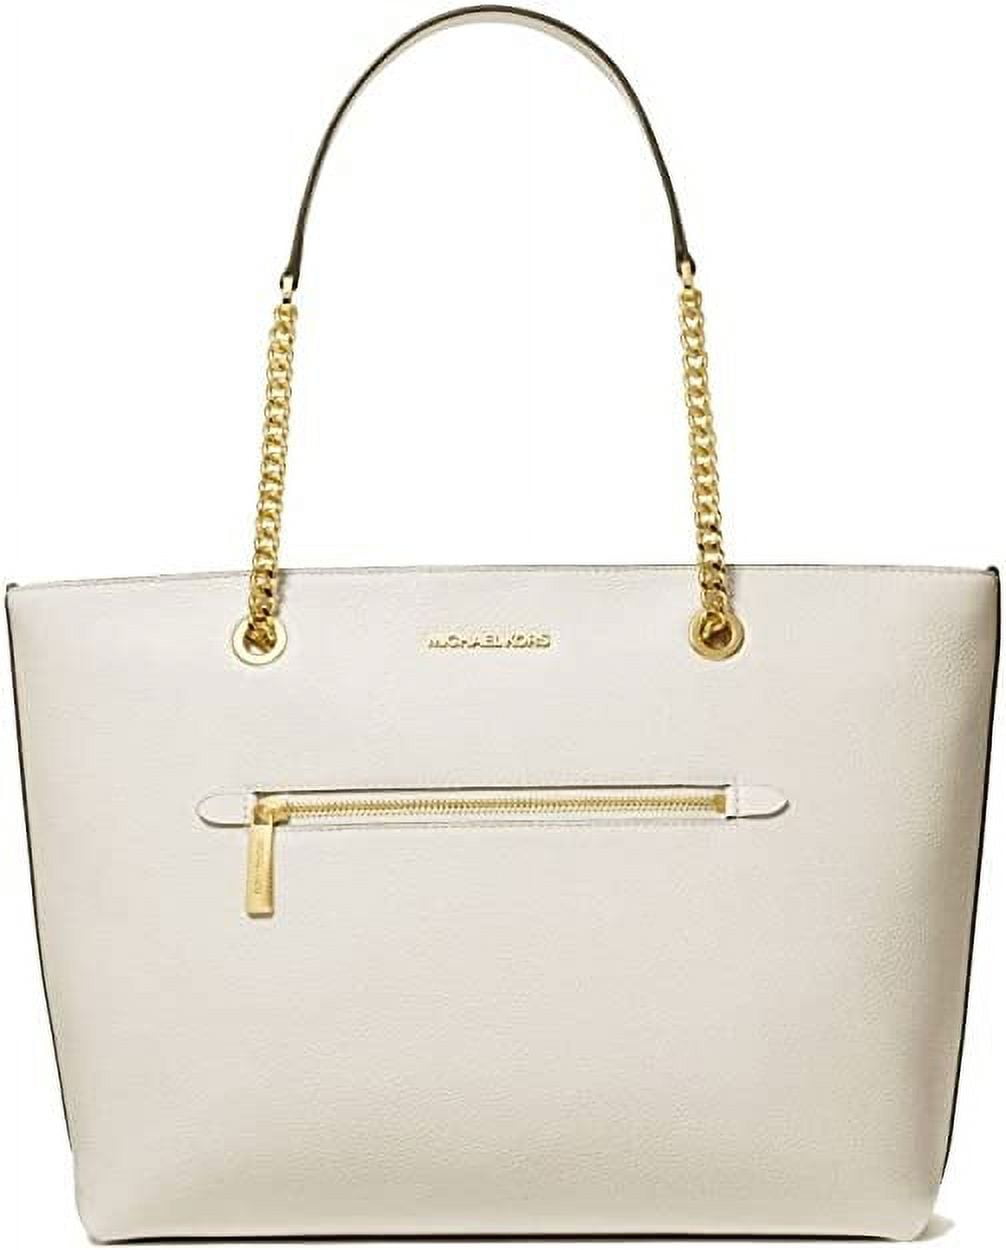 Michael Kors Outlet: tote bags for women - Gold